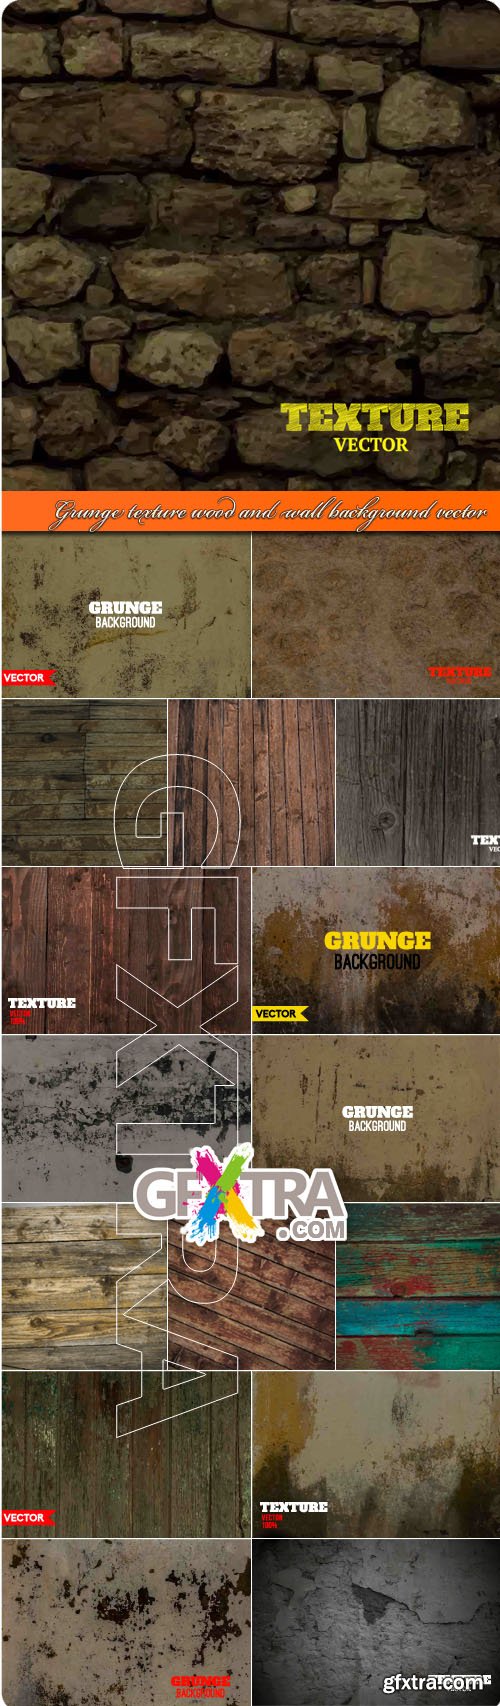 Grunge texture wood and wall background vector